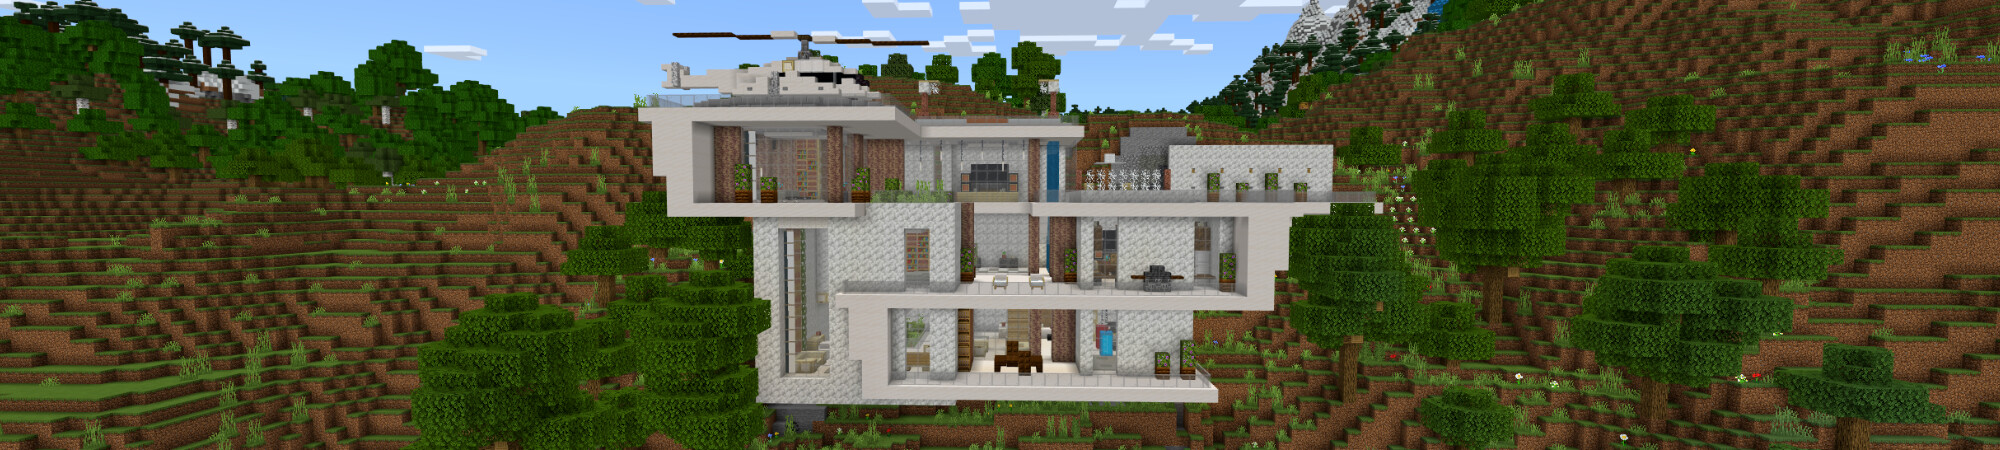 Modern Deluxe Mansion Panorama